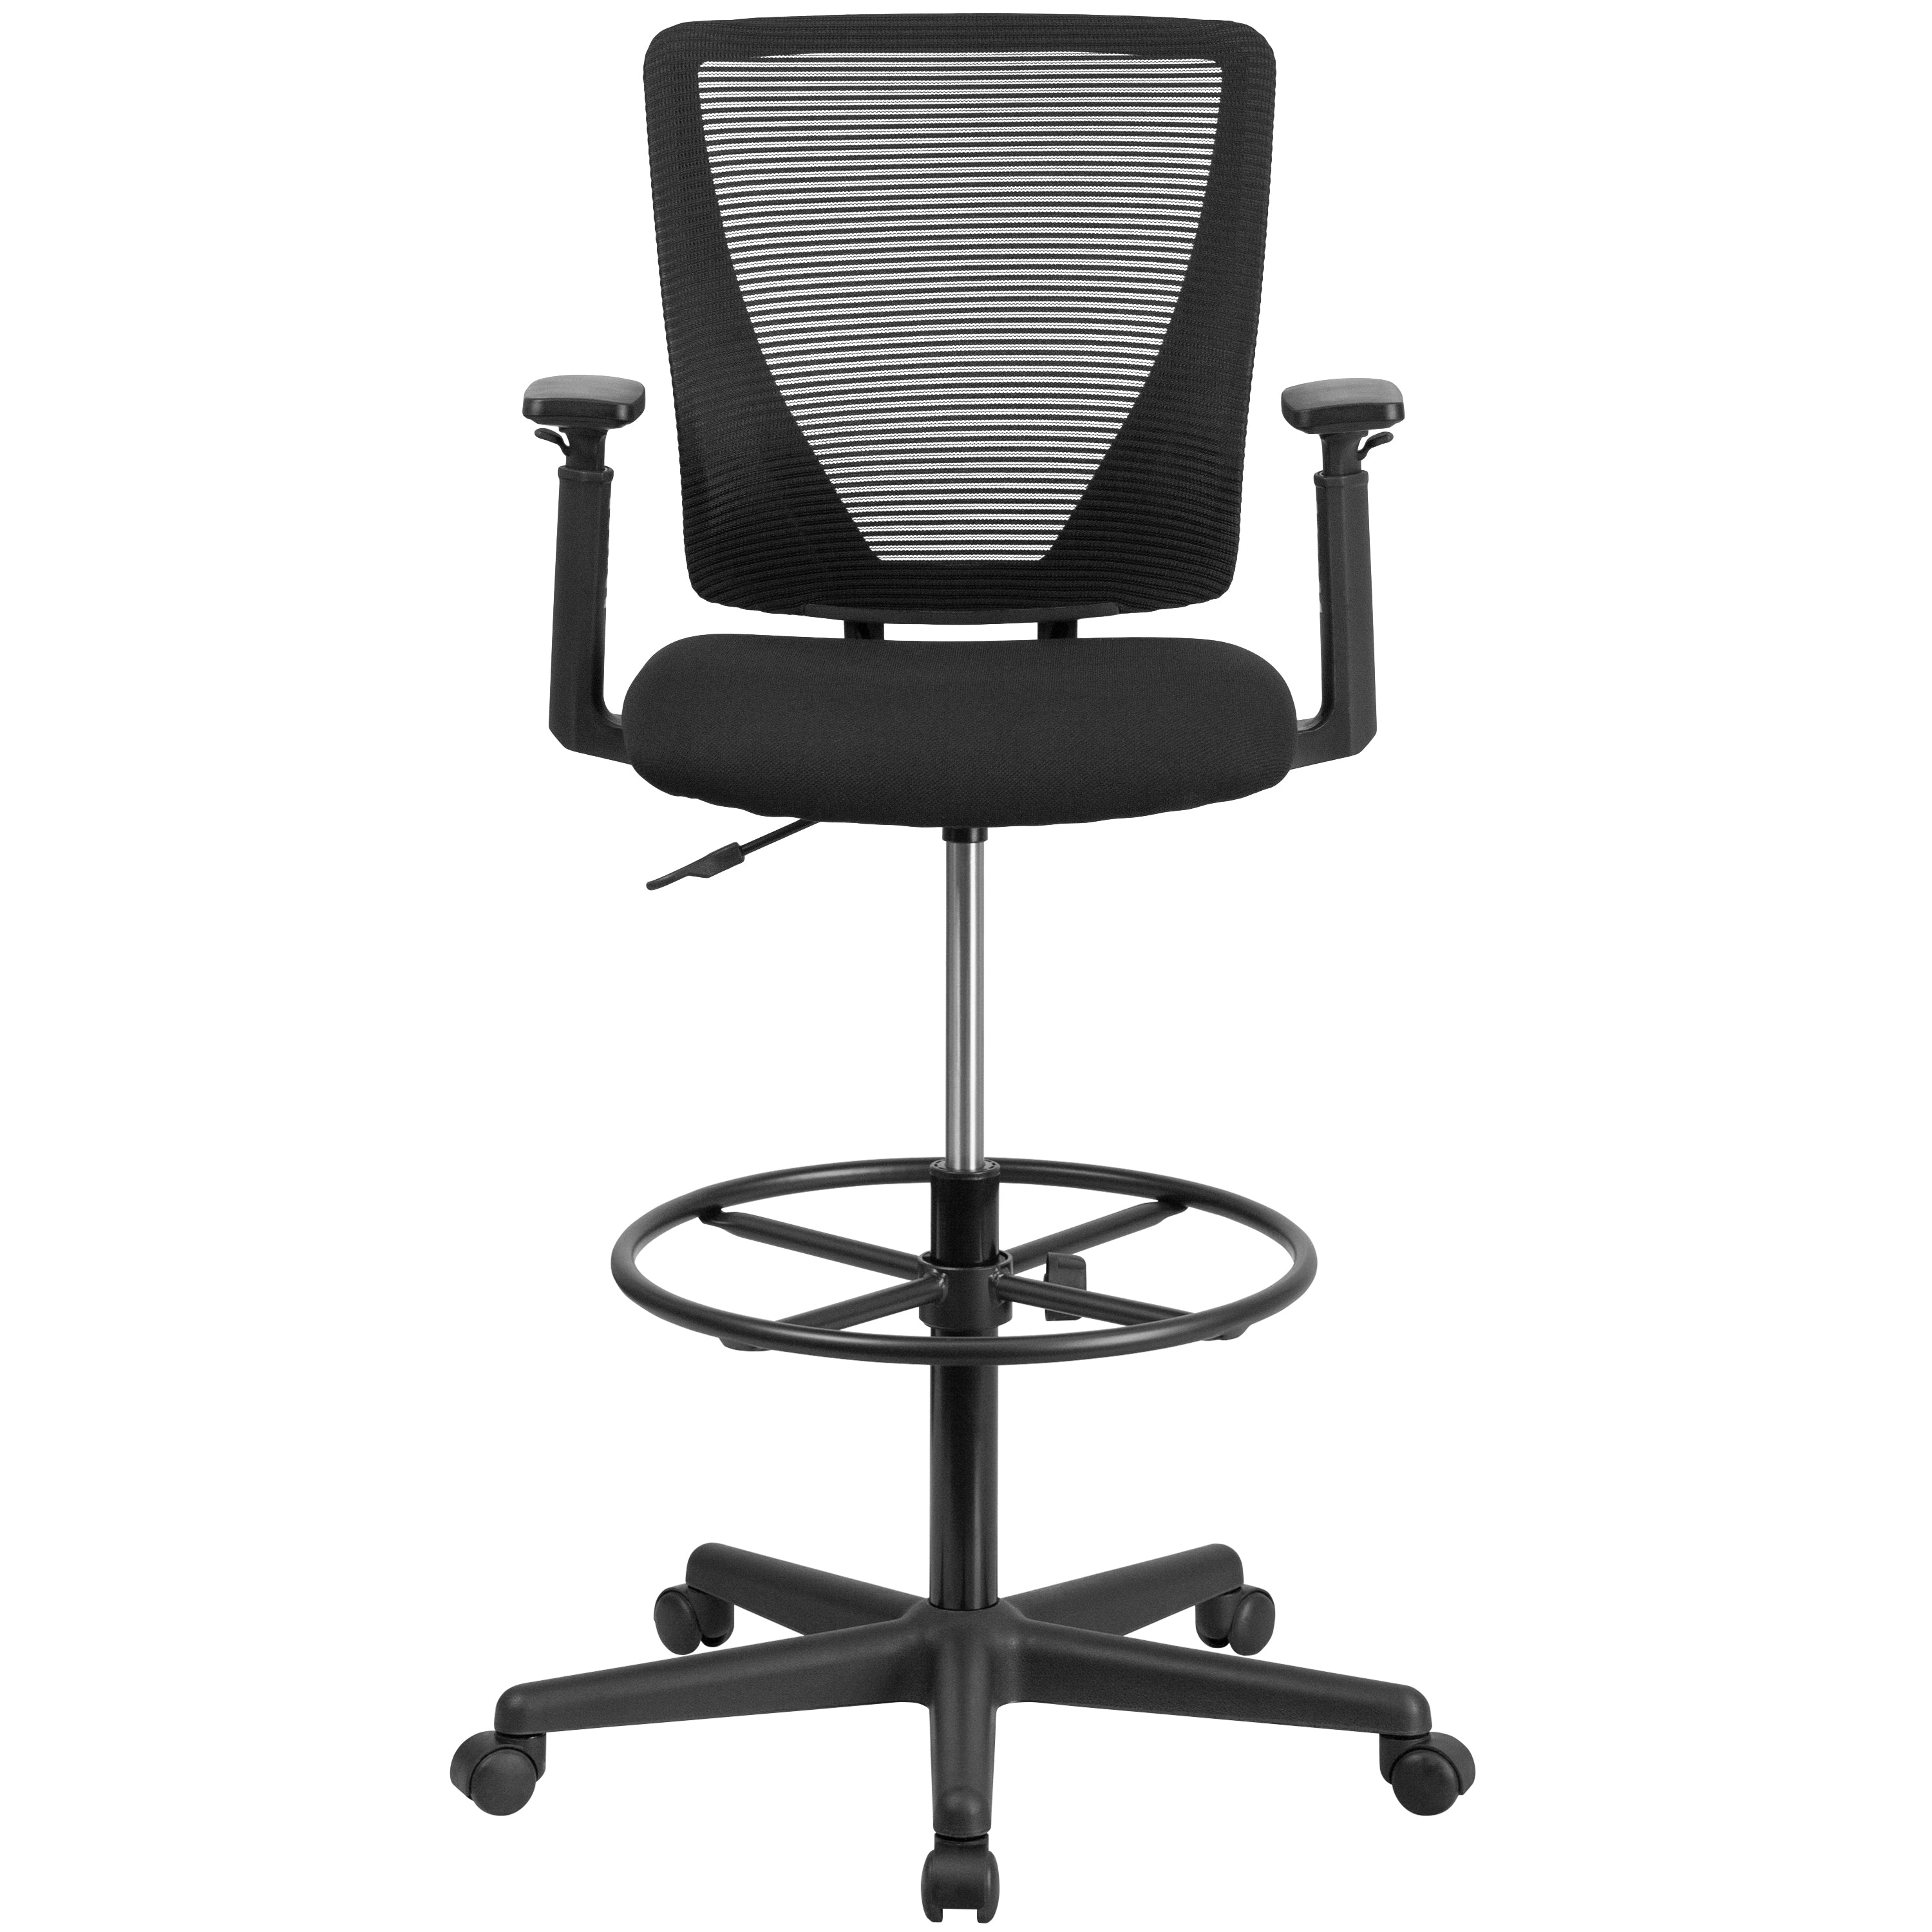 Ergonomic Mid-Back Mesh Drafting Chair with Fabric Seat, Adjustable Foot Ring and Arms-Office Chair-Flash Furniture-Wall2Wall Furnishings